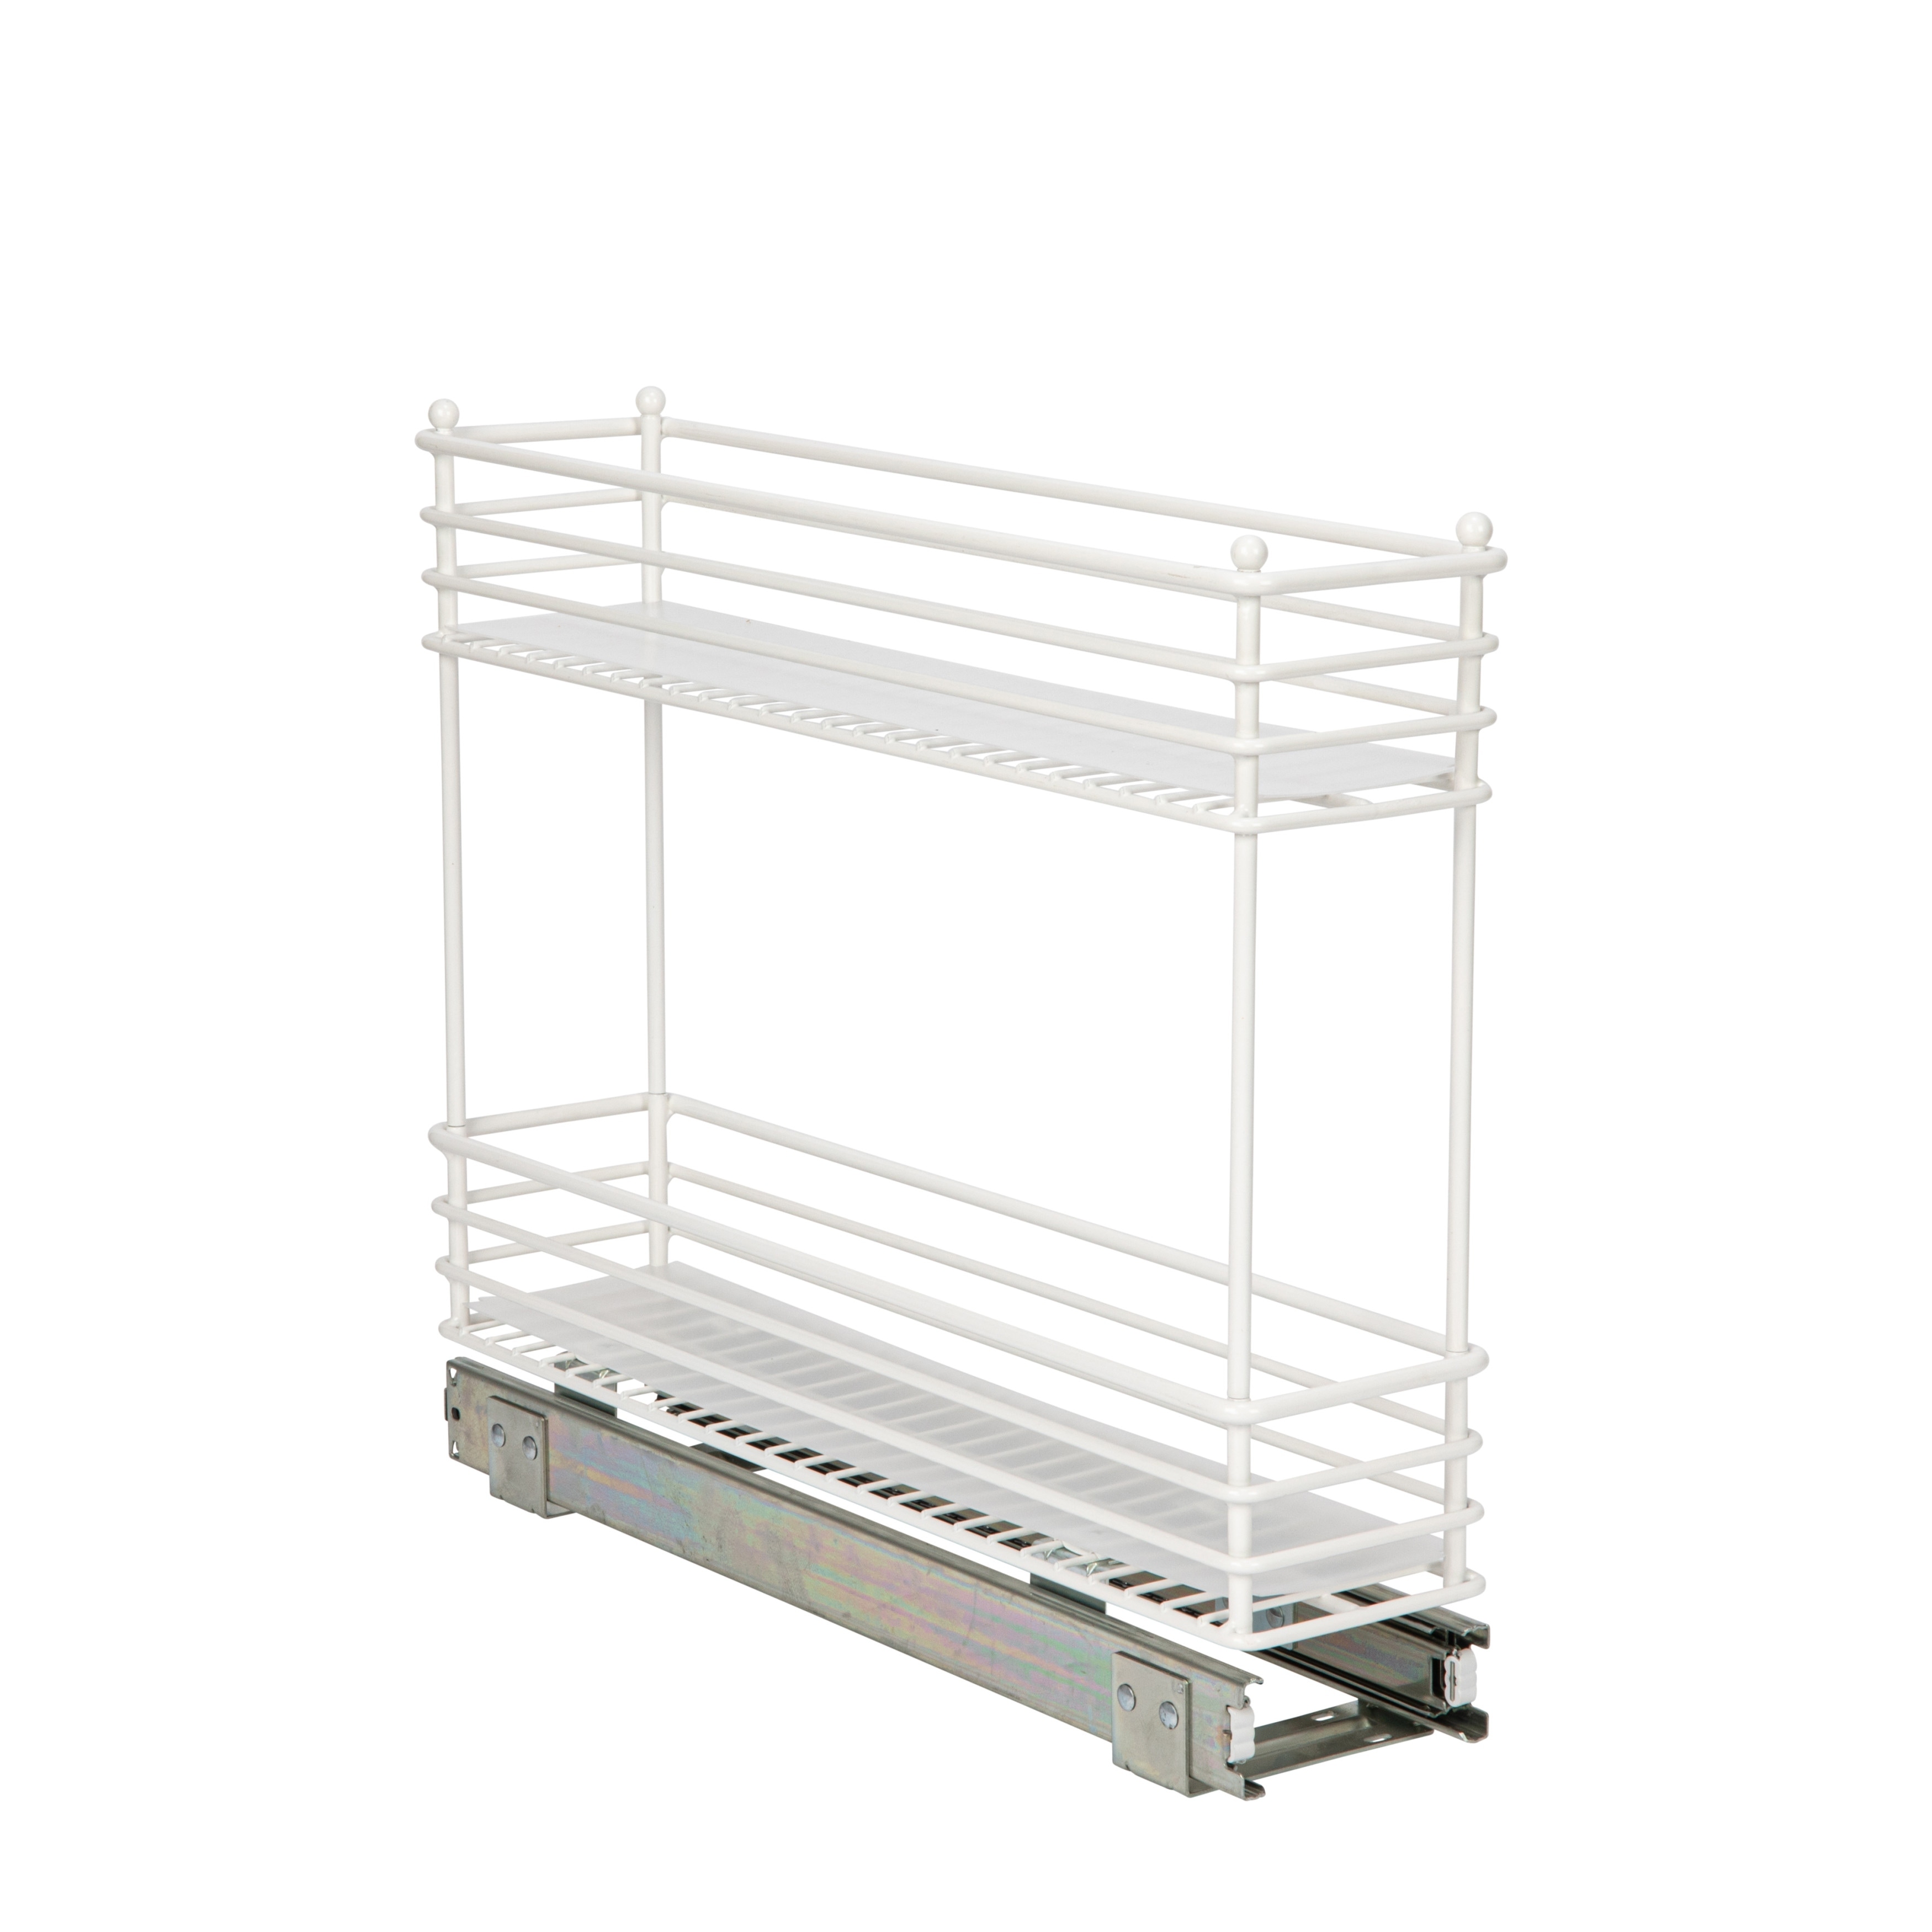 https://ak1.ostkcdn.com/images/products/is/images/direct/5a1acf8a74ad30856903763d4f5357f738092712/Narrow-Two-Sliding-Cabinet-Organizer%2C-Great-for-Slim-Cabinets-in-Kitchen.jpg